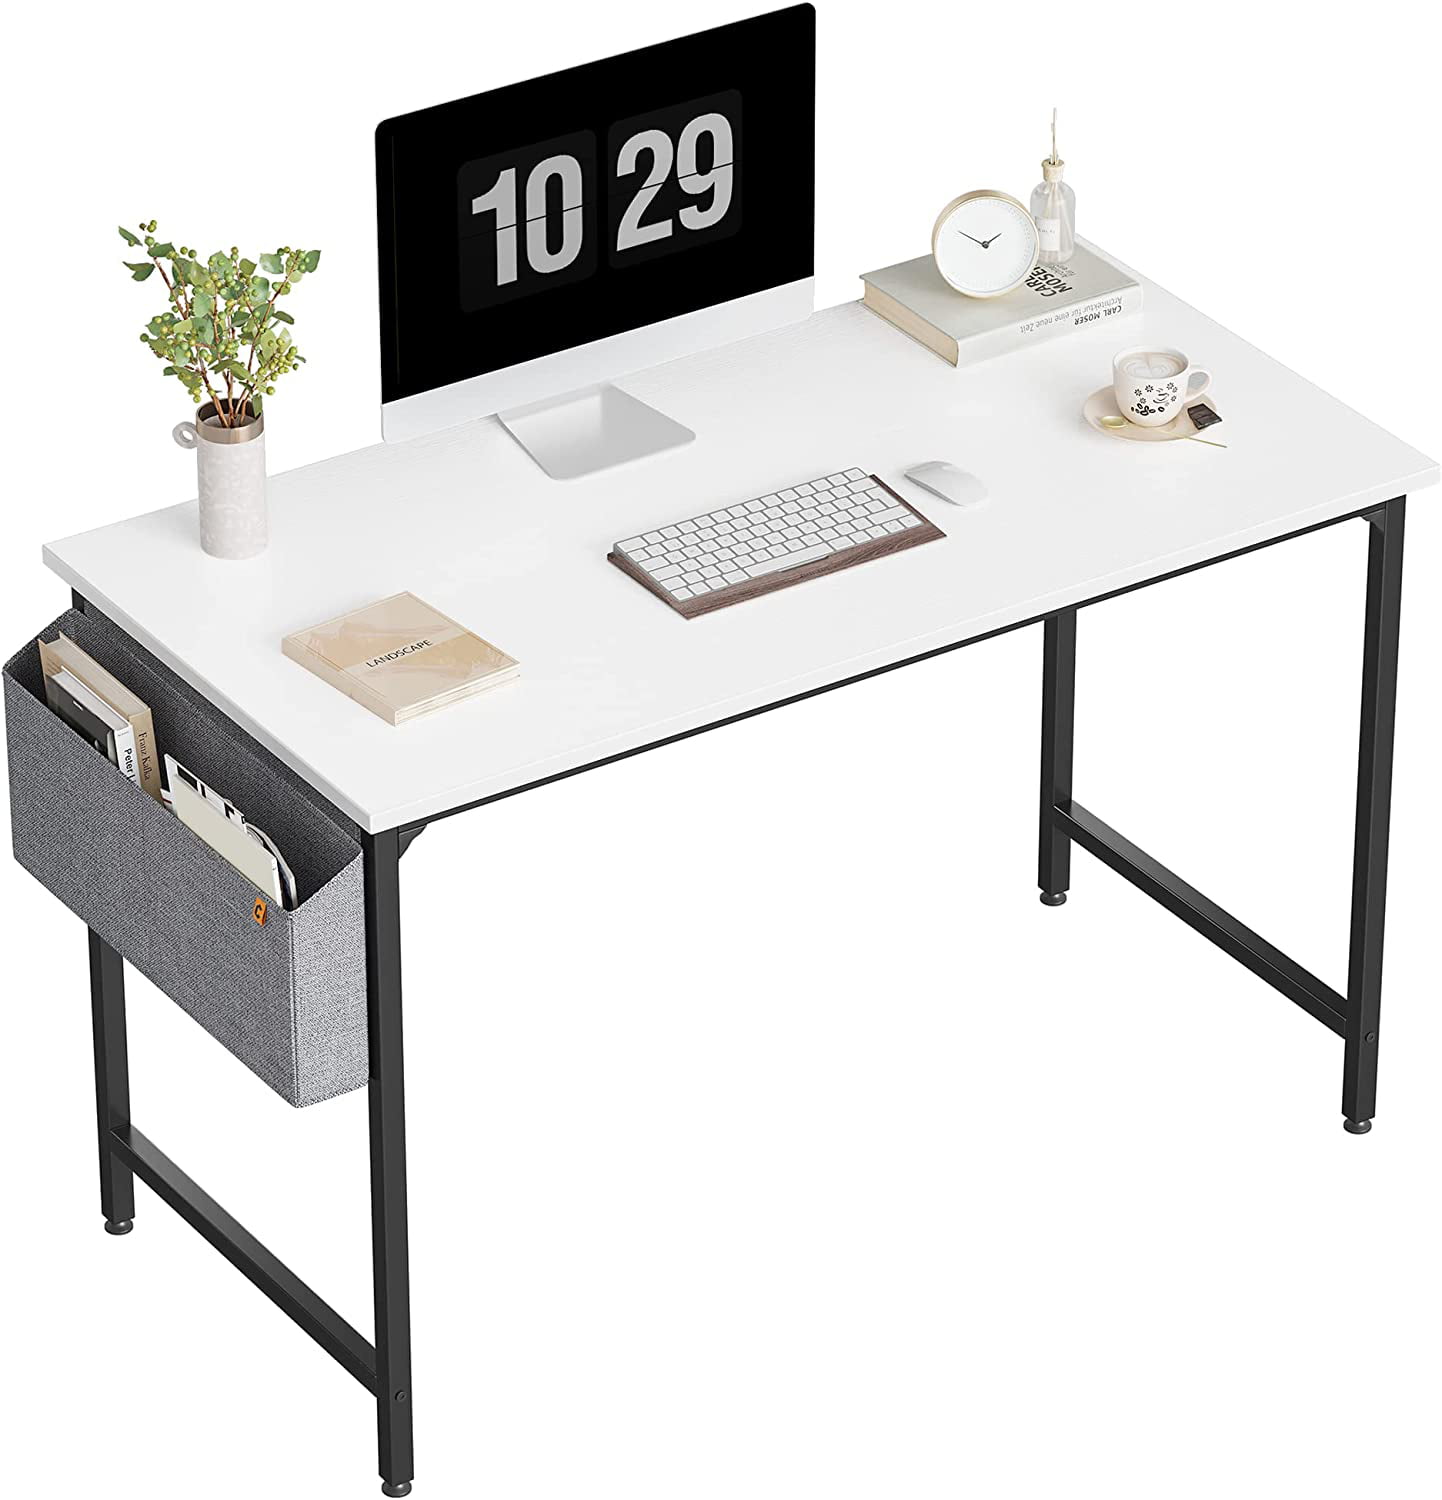 Modern Simple Style PC Desk CubiCubi Computer Desk 32 Study Writing Table for Home Office White Black Metal Frame 